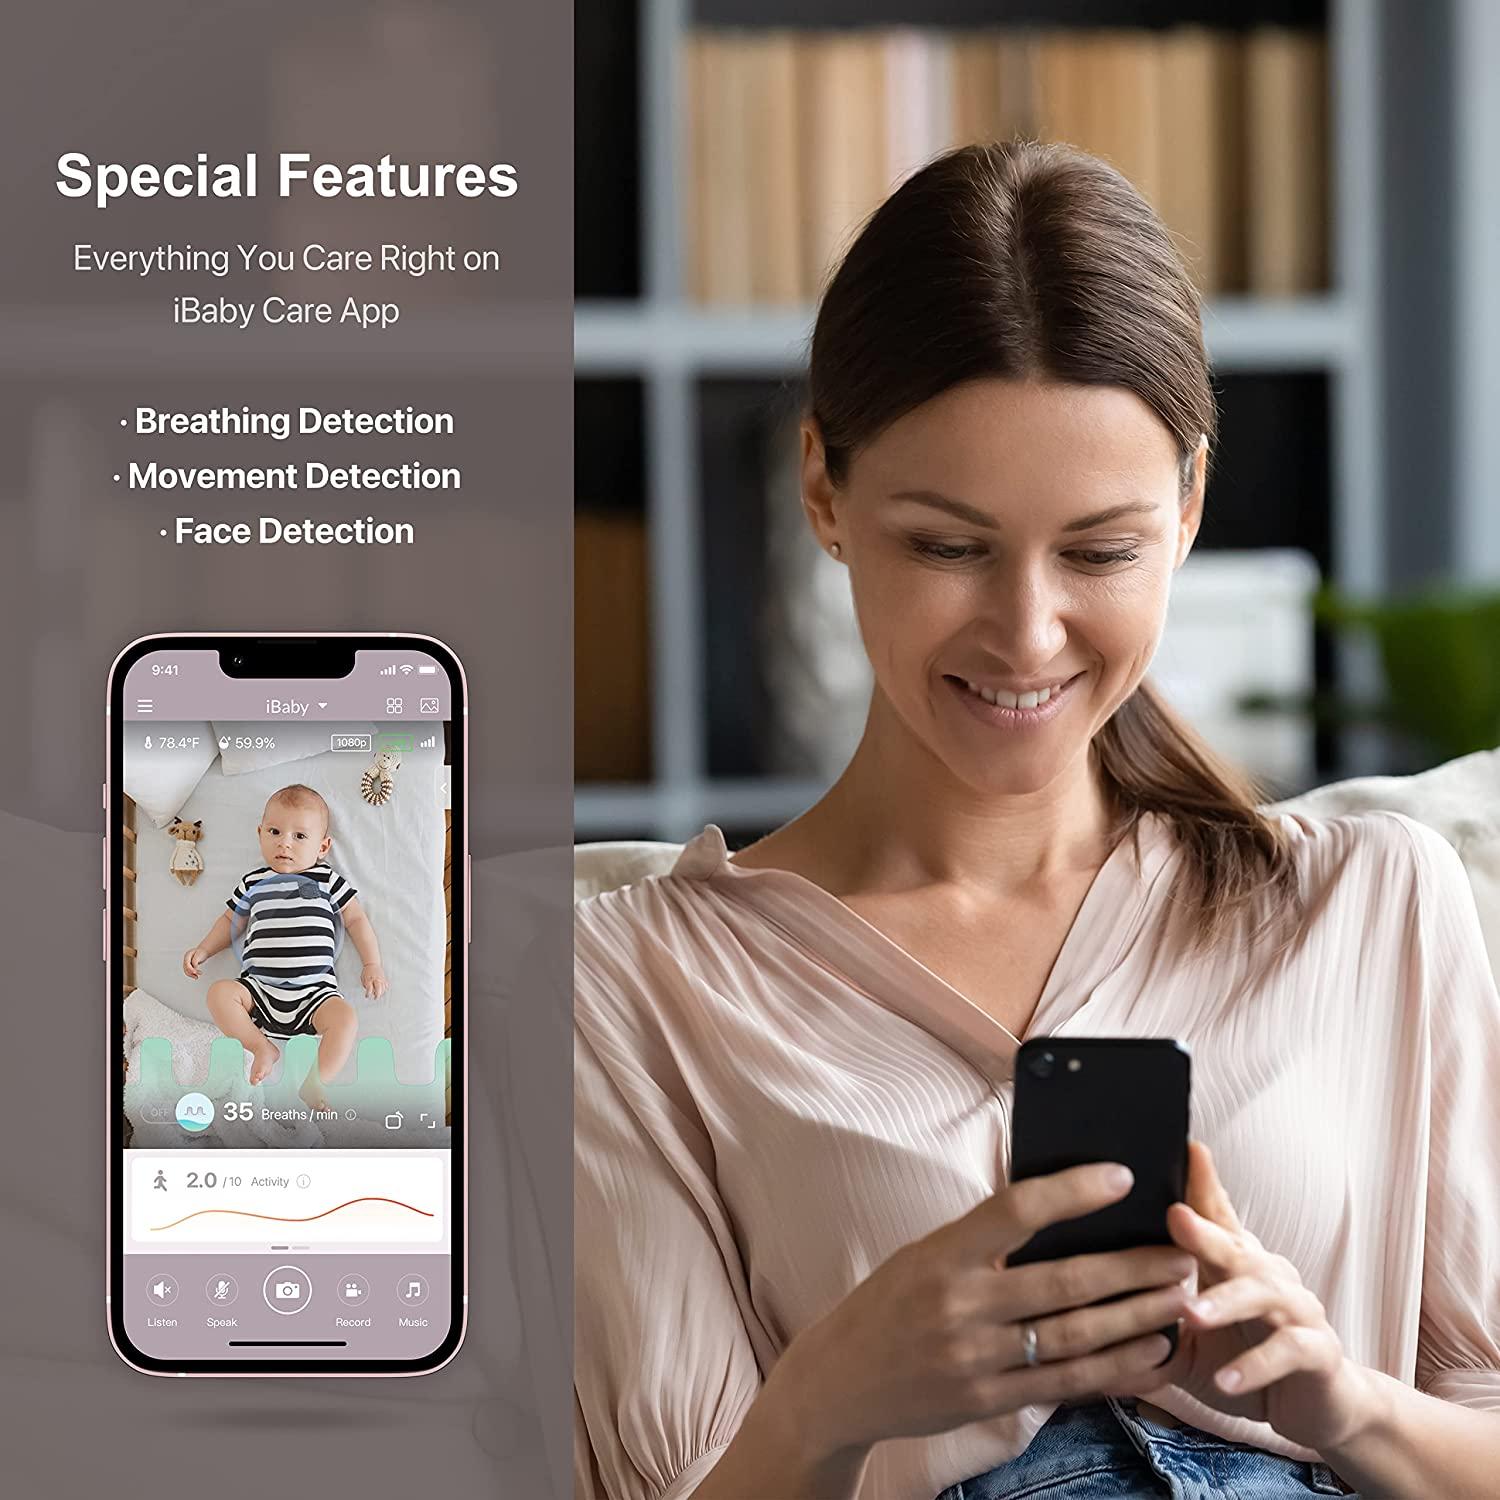 iBaby Smart Baby Breathing Monitor - with Camera and Audio, Tracking Baby's  Breathing, Sleeping, Movement. i2 Wi-Fi Video Baby Monitor, Contactless,  Work with Smartphone.